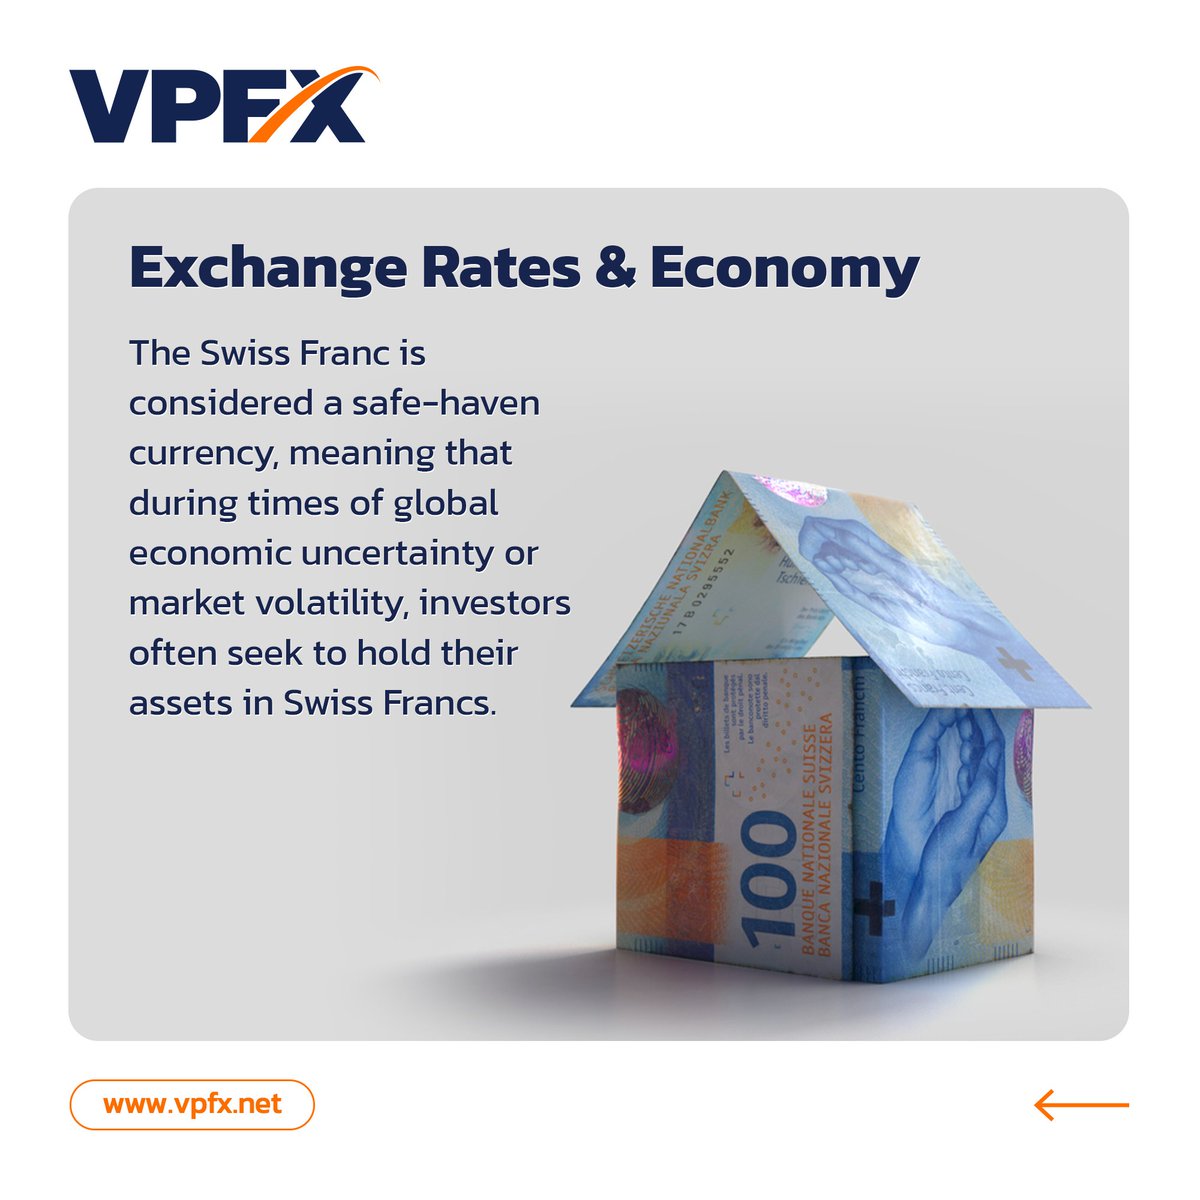 Swiss Franc The Swiss Franc (CHF) is the official currency of Switzerland and Liechtenstein, as well as the Italian exclave of Campione d’Italia. #vpfx #swiss #france #switzerland #forexbroker #forexmarket #carousel #education